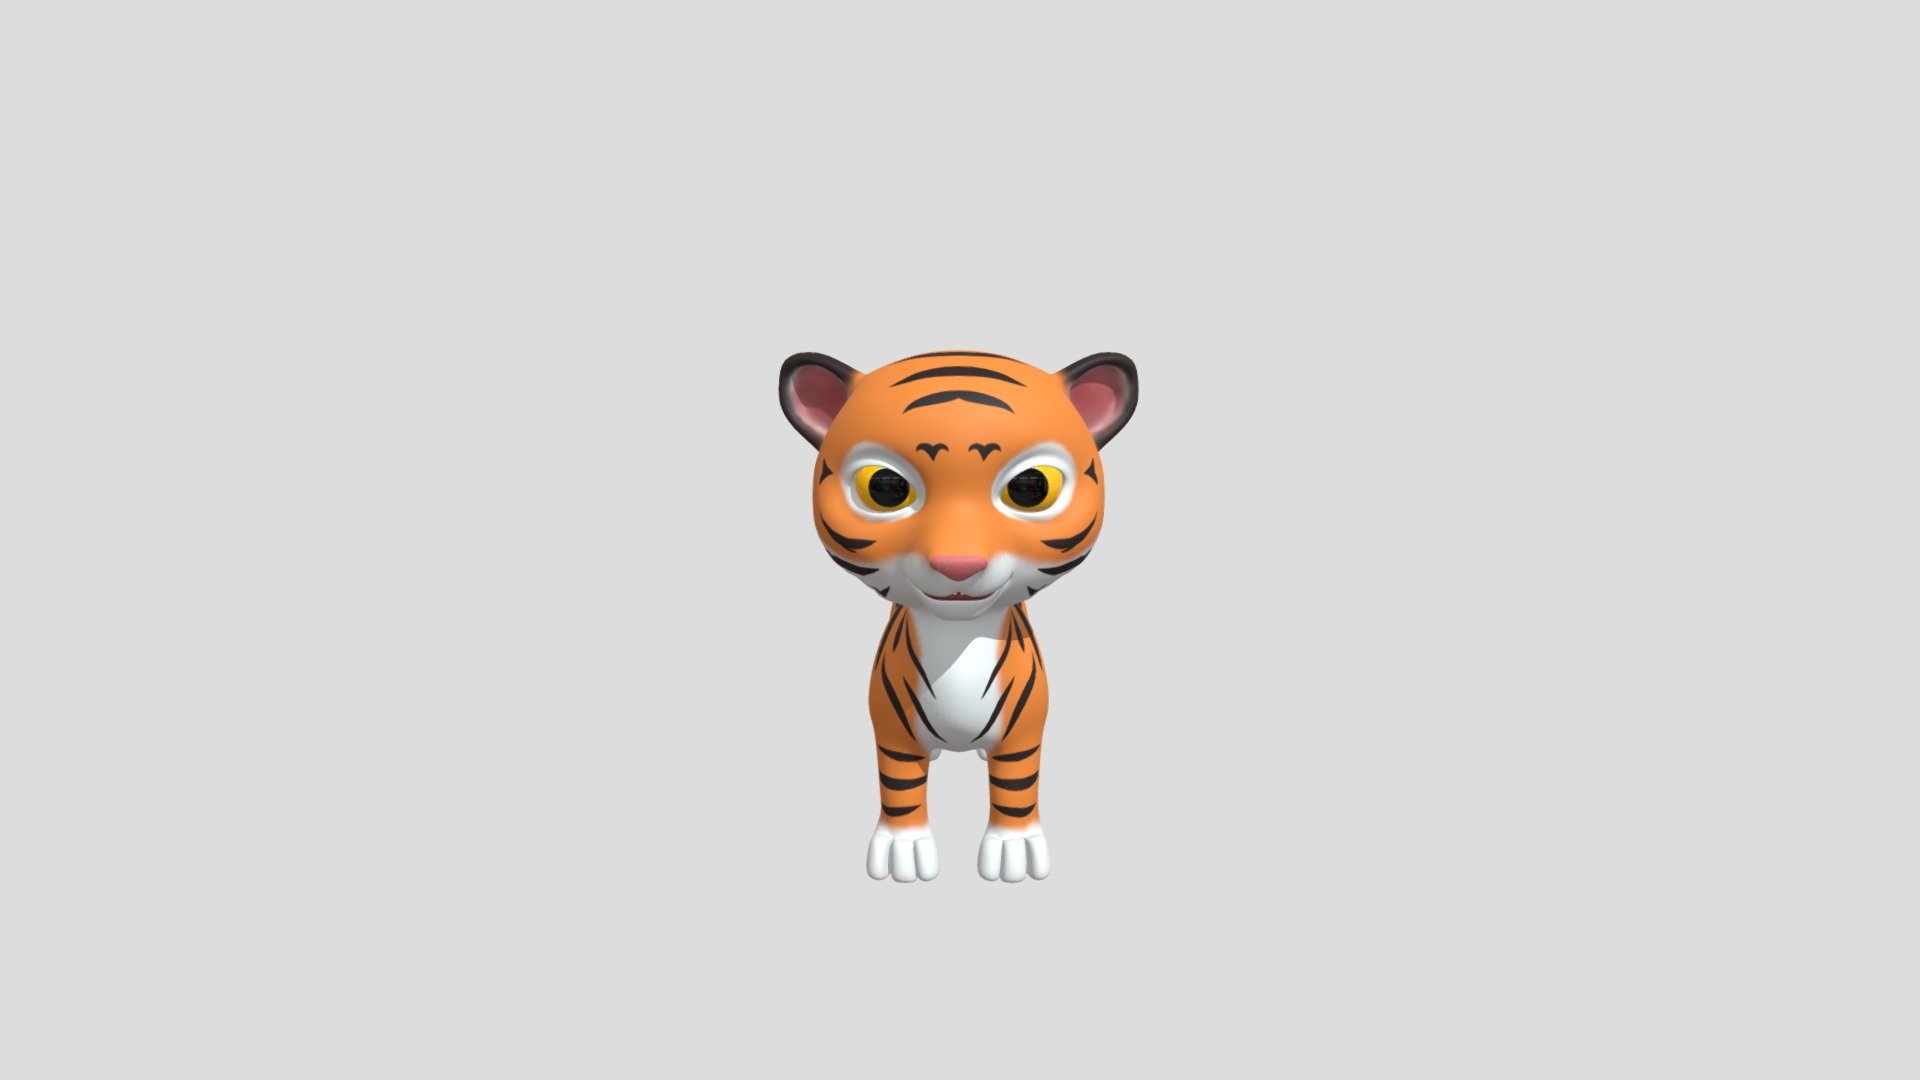 cartoon rigged Tiger for blender

advance blender rig

all objects are properly named

clean topolgy

Advance blender rig

facial rig eye rig ear rig teeth rig and tongue rig
body rig leg rig tail rig

Textures

EYES_Base_Color_1001
EYES_Normal_OpenGL_1001
EYES_Roughness_1001
INNER _MOUTH_Base_Color_1001
INNER _MOUTH_Normal_OpenGL_1001
INNER _MOUTH_Roughness_1001
TEETH_Base_Color_1001
TEETH_Normal_OpenGL_1001
TEETH_Roughness_1001
TIGER_BODY_Base_Color_1001
TIGER_BODY_Normal_OpenGL_1001
TIGER_BODY_Roughness_1001
TONGUE_Base_Color_1001
TONGUE_Normal_OpenGL_1001
TONGUE_Roughness_1001 - cartoon tiger - 3D model by Accurate (@pleasurep580) 3d model